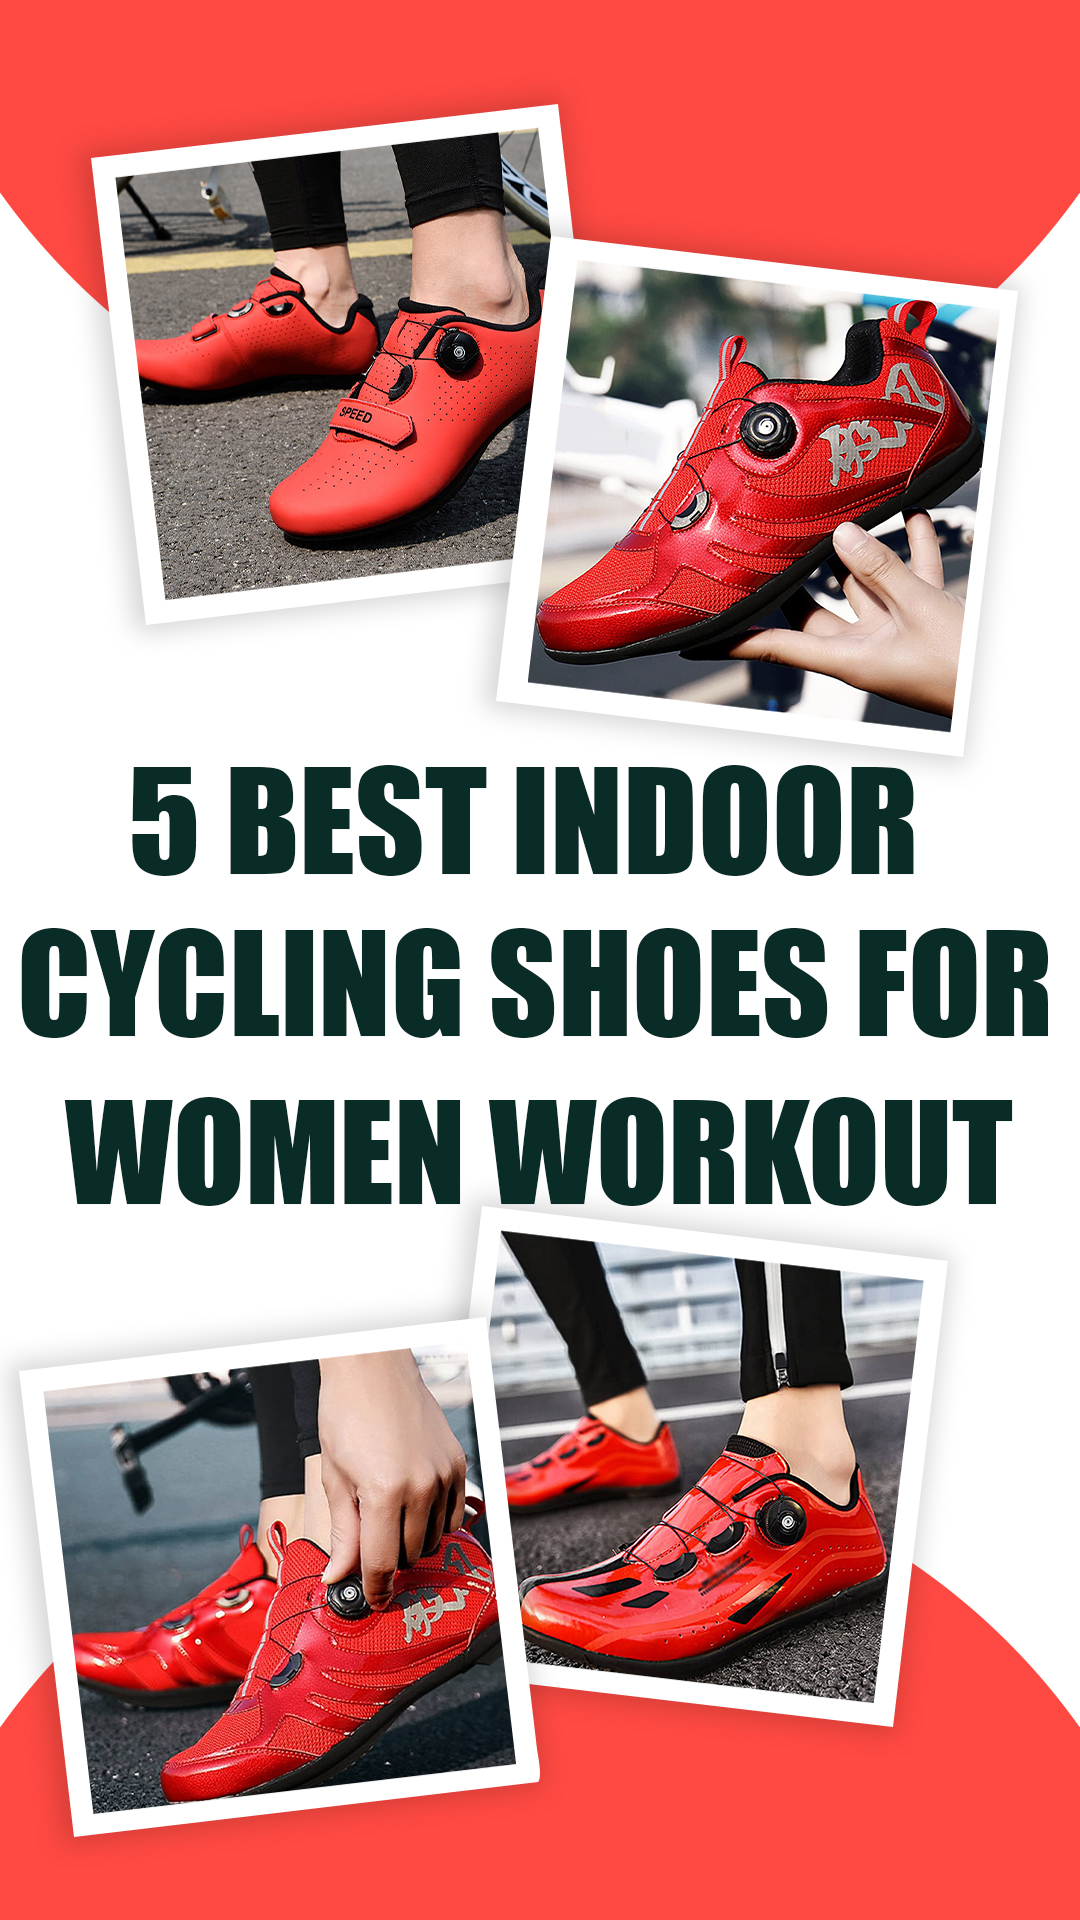 5 Best Indoor Cycling Shoes for Women